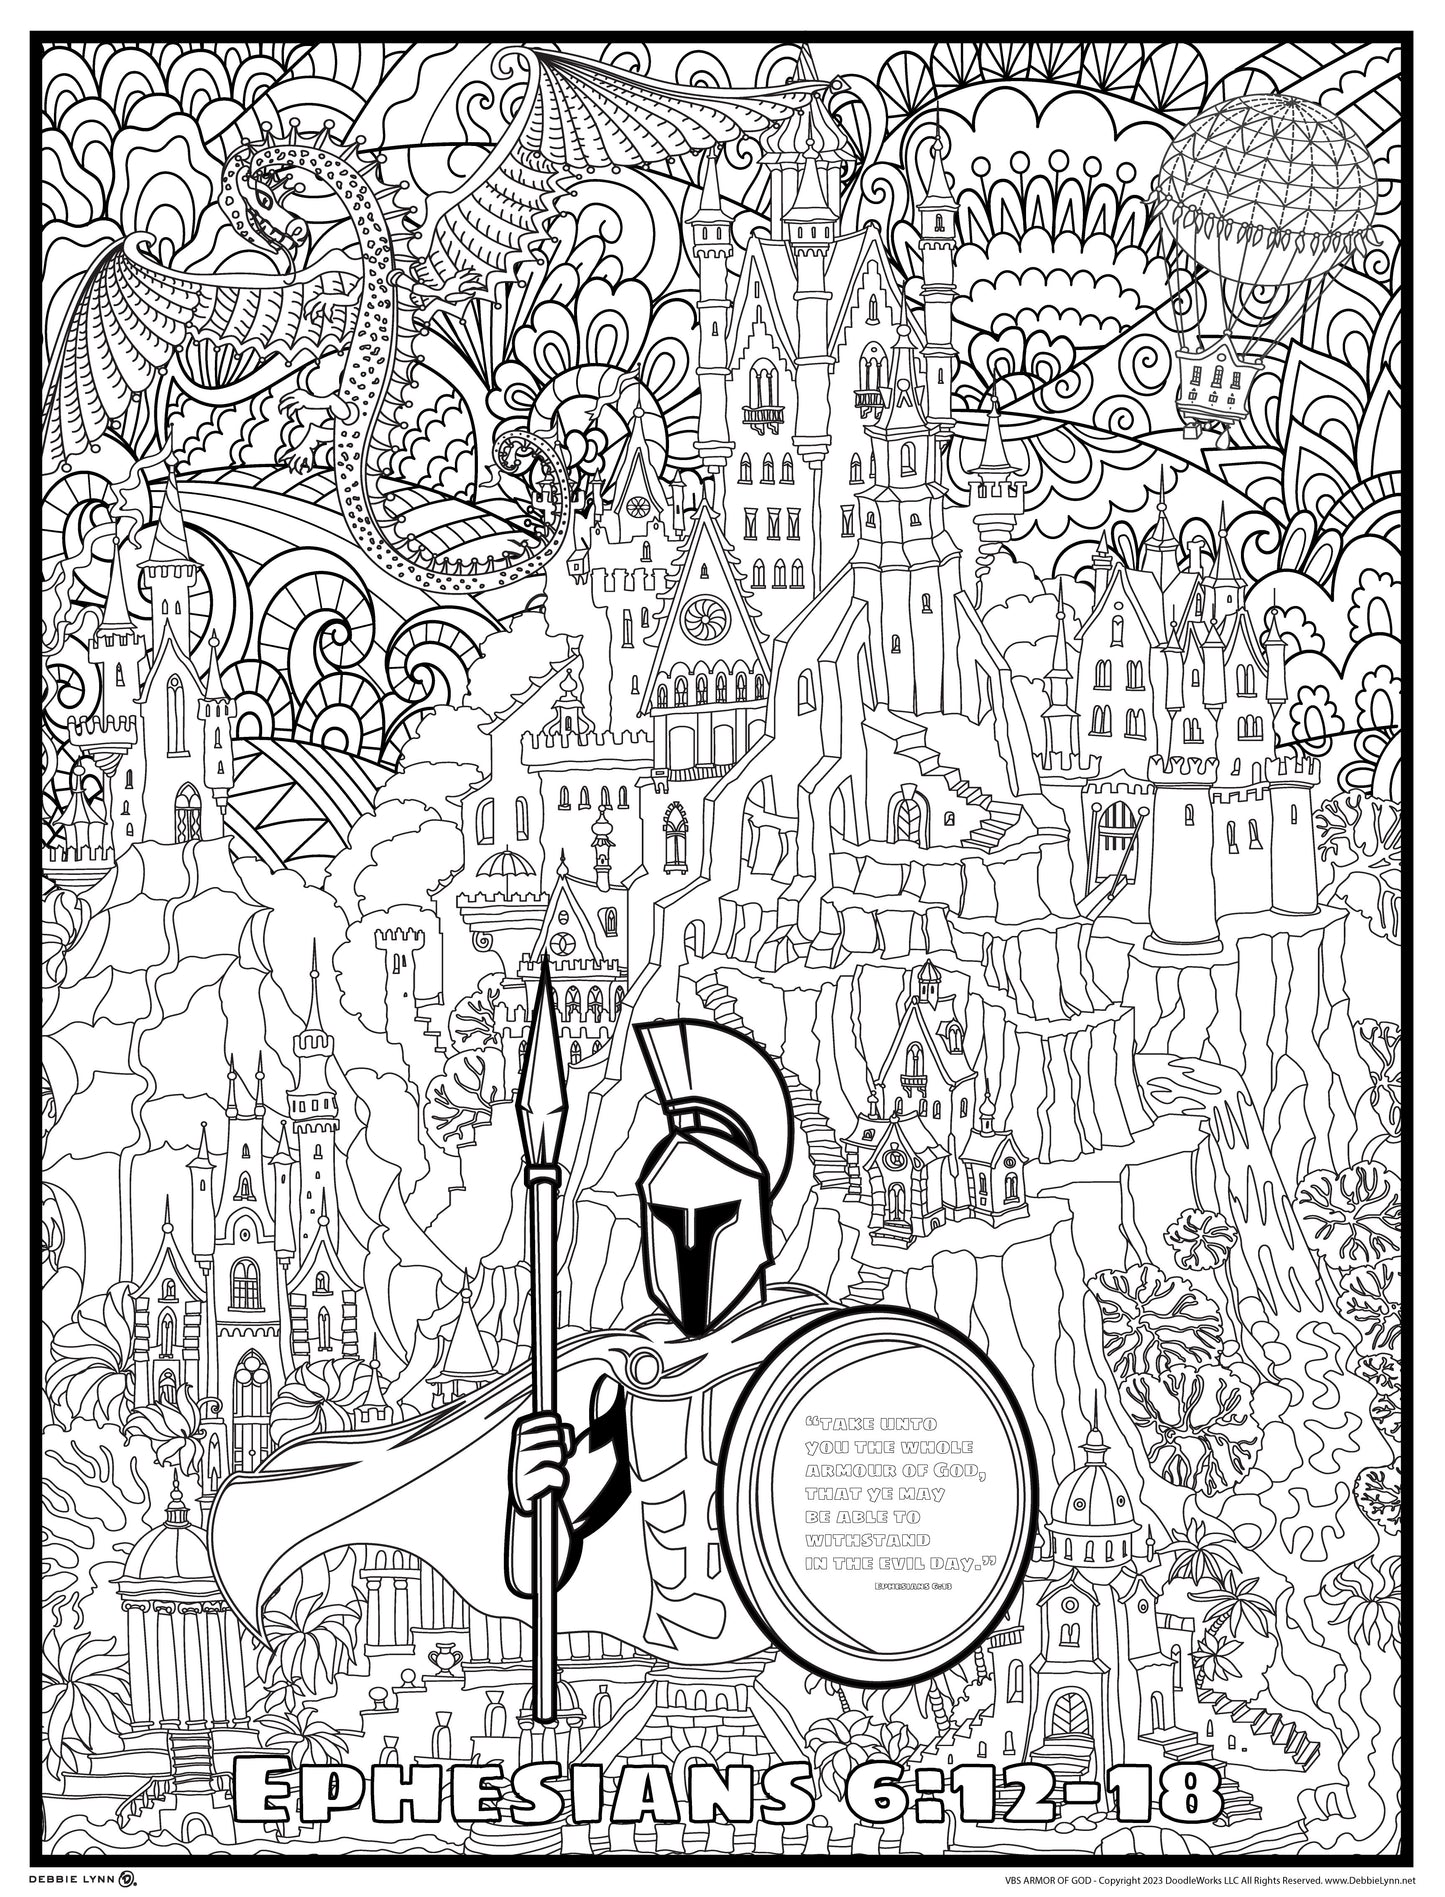 ARMOR OF GOD-VBS-FAITH PERSONALIZED GIANT COLORING POSTER 46"x60"